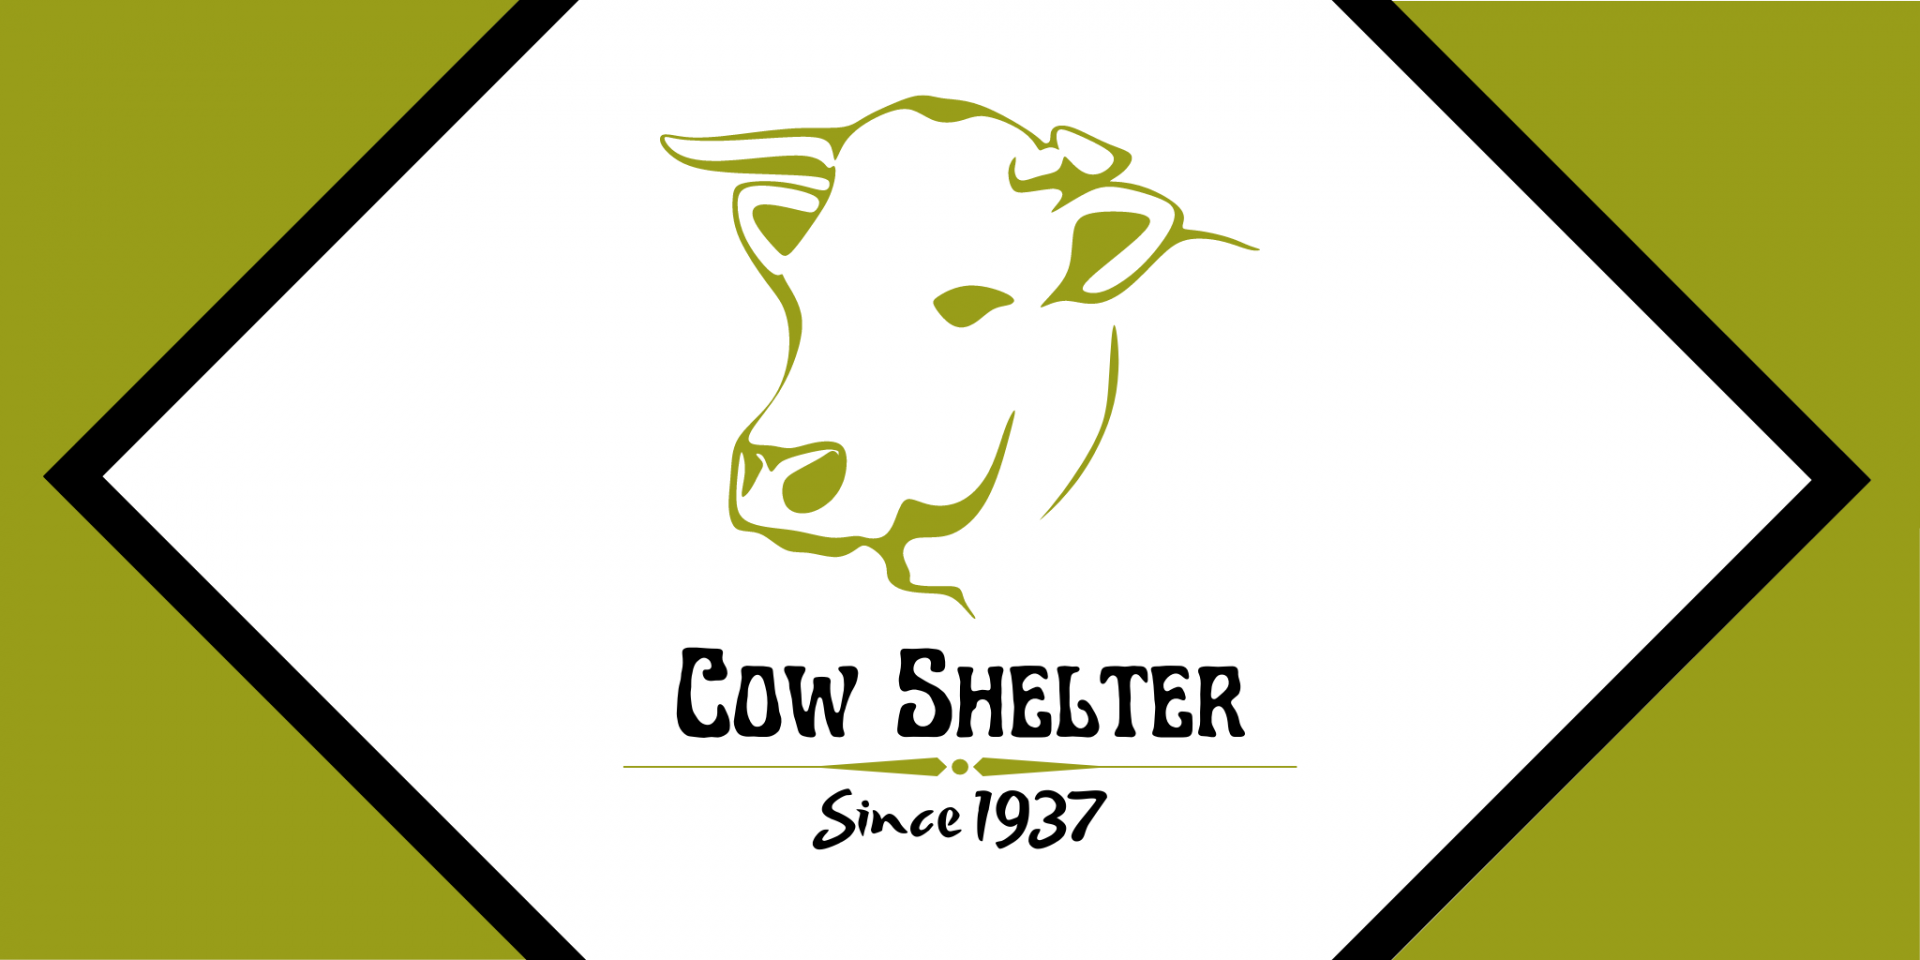 Cowshelter board logo